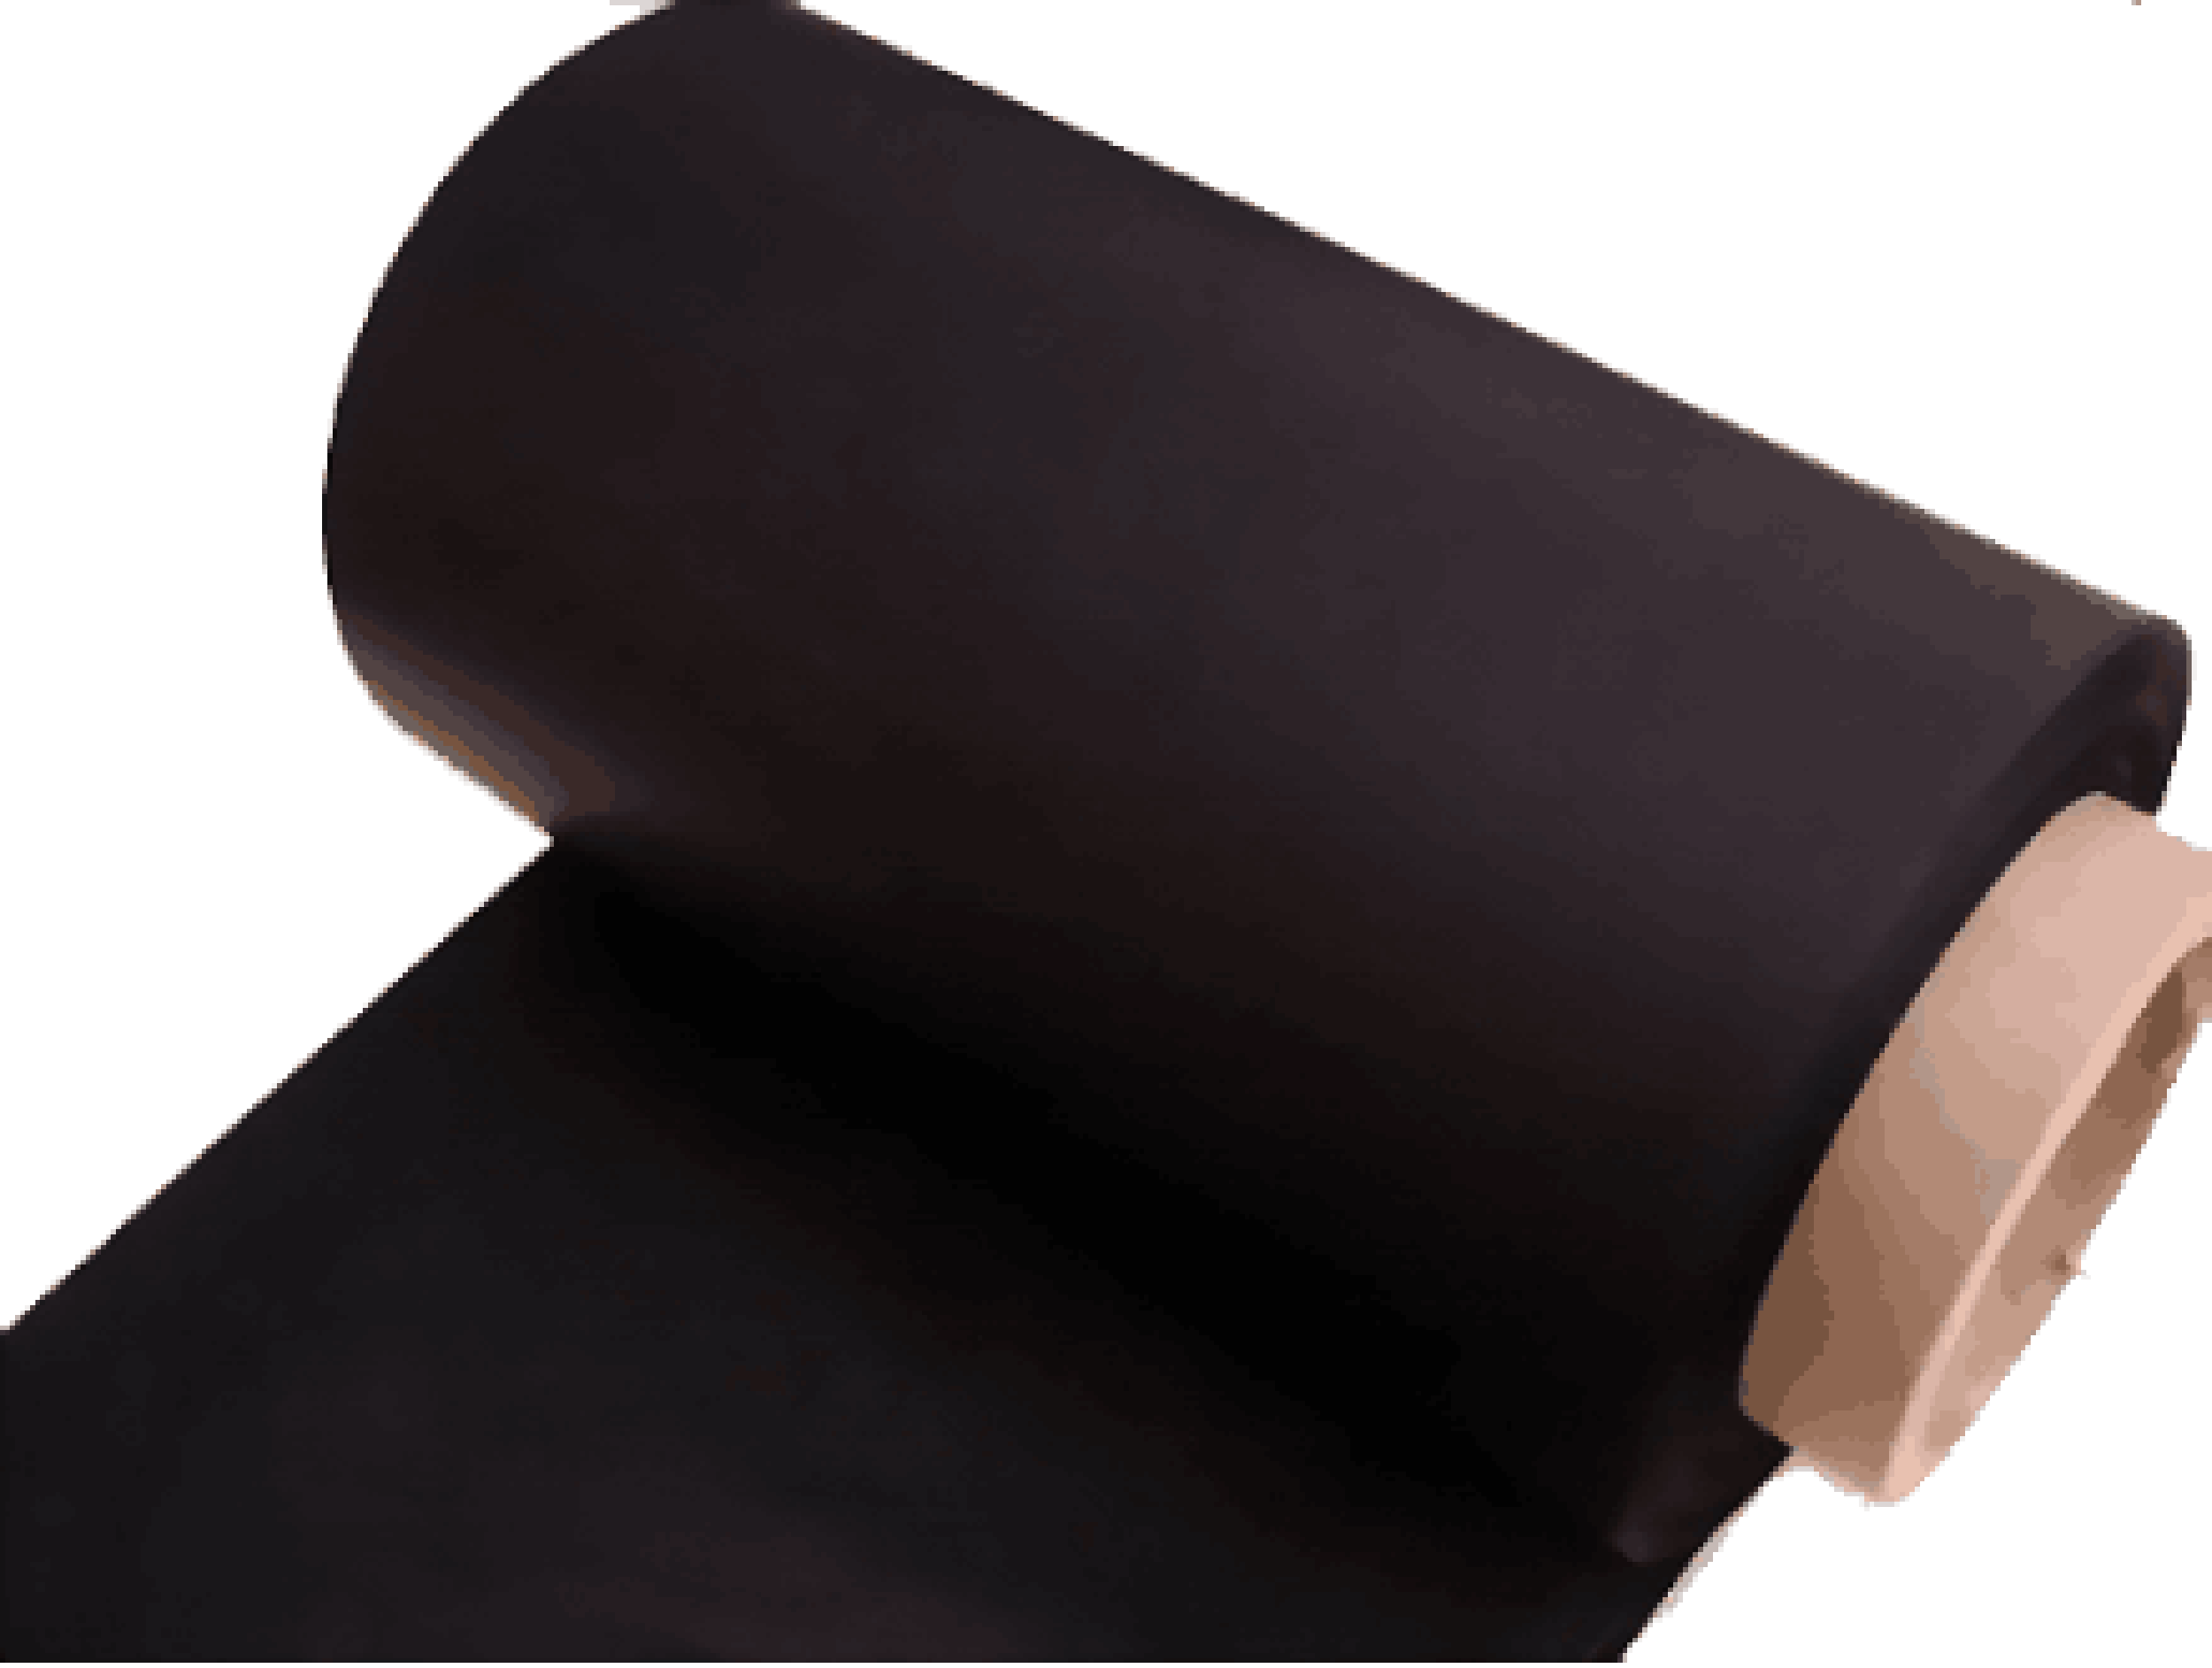 Pu Electrically Black carbon conductive film For Ecg